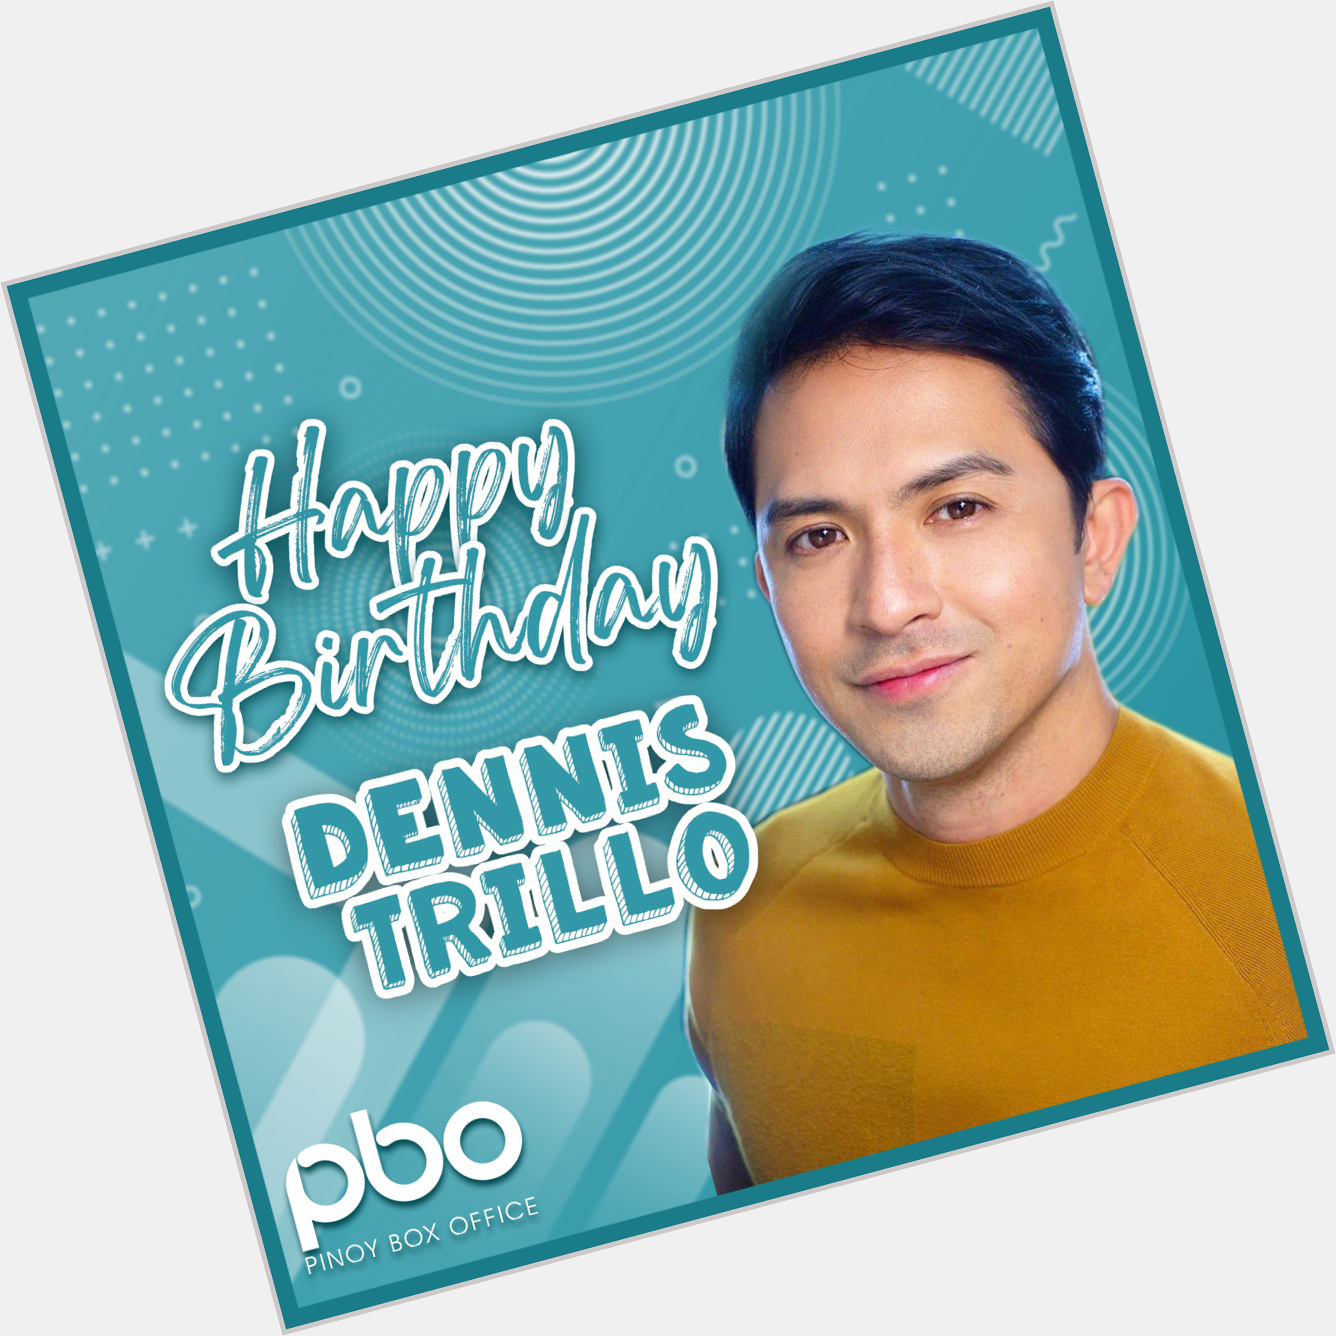 Happy birthday, Dennis Trillo! May this day brings you good luck and fortune! 